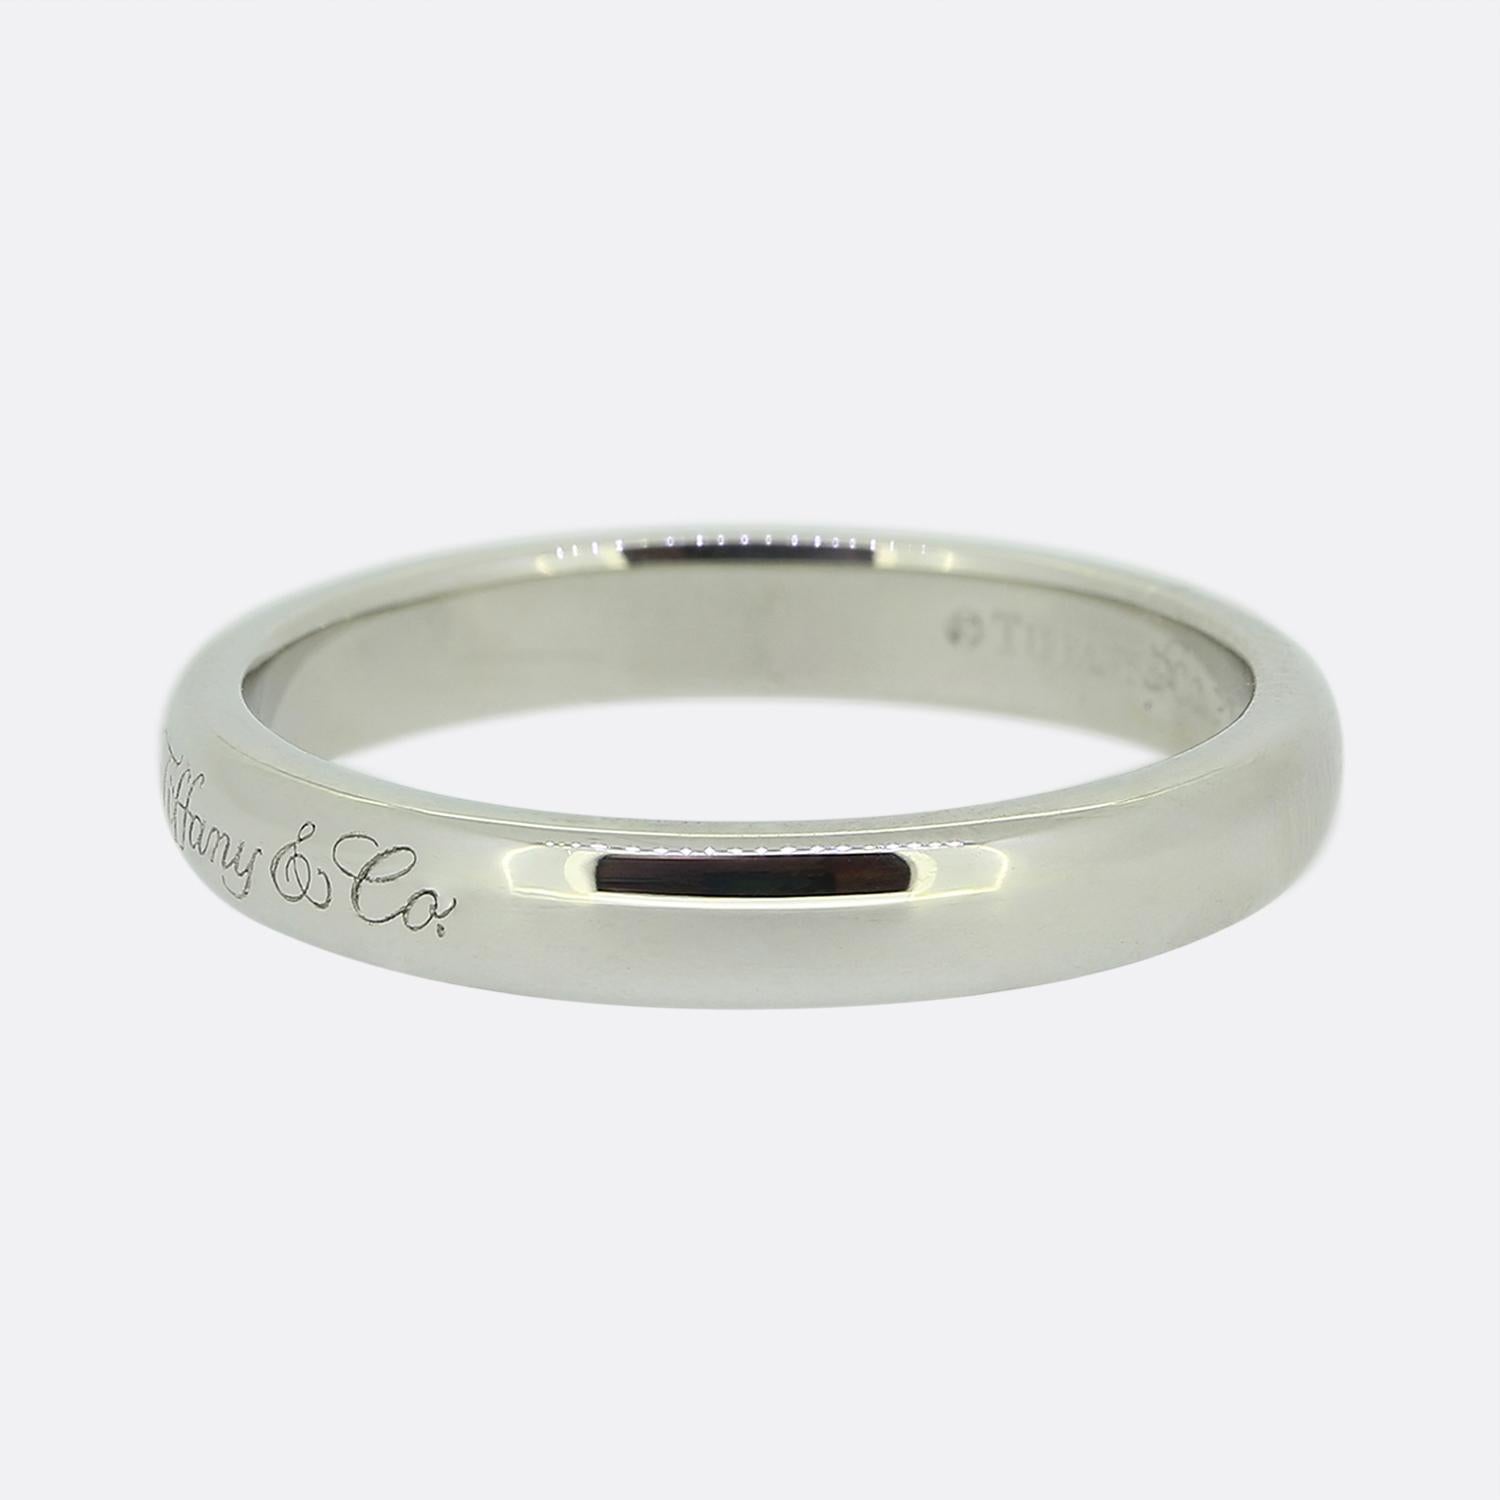 Here we have a platinum wedding band ring from the world renowned jewellery designer, Tiffany & Co. This piece showcases a high polished finish with the 'Tiffany&Co.' signature at the face. 

Condition: Used (Very Good)
Weight: 4.4 grams
Ring